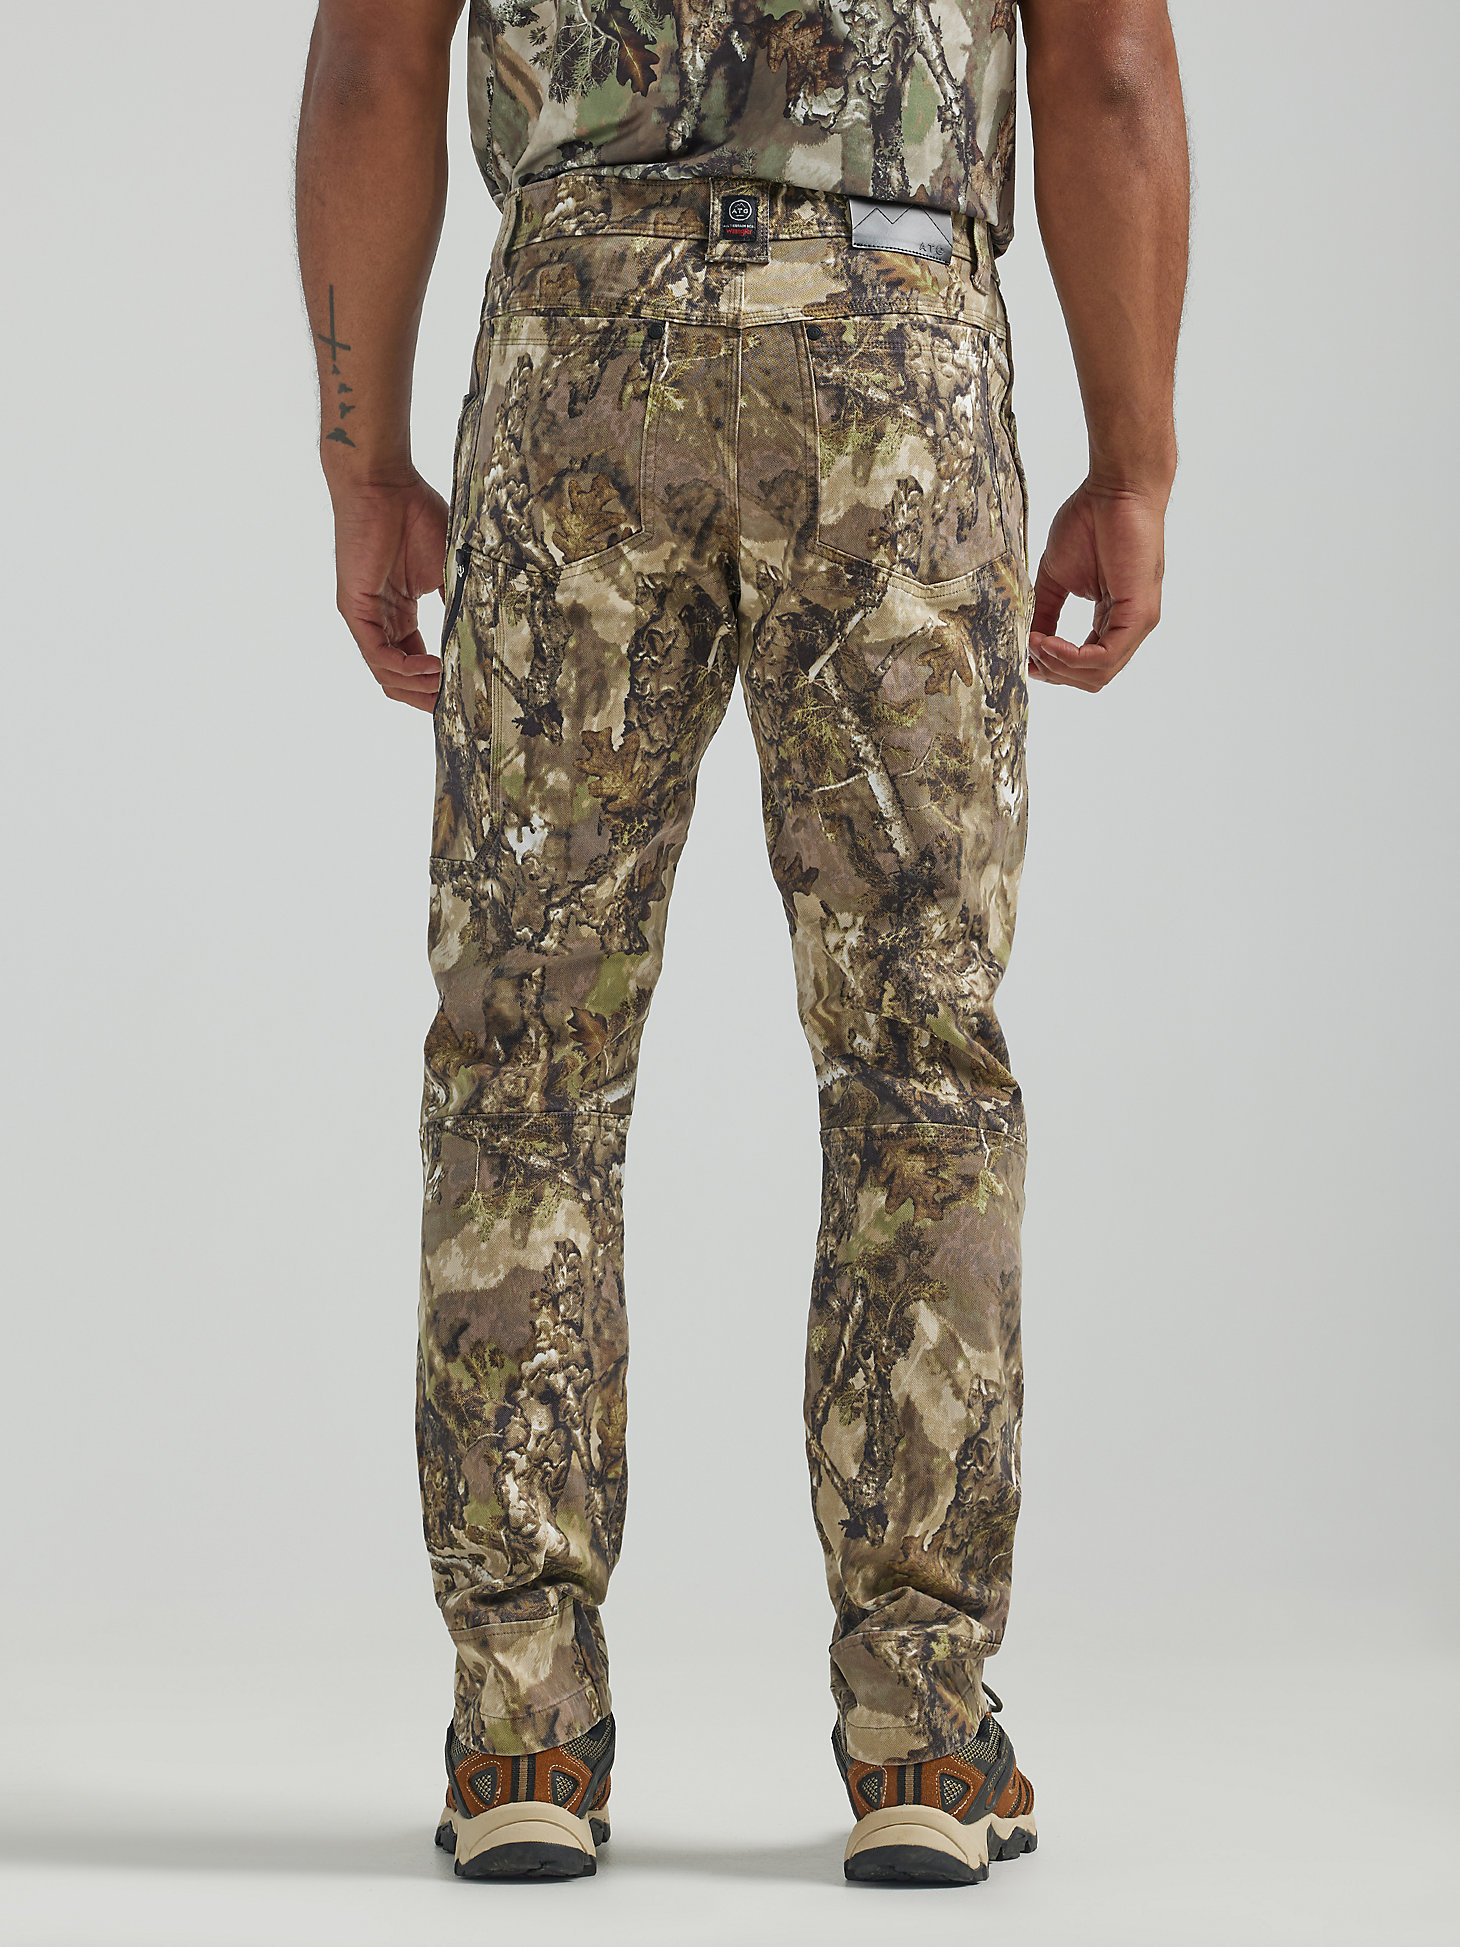 ATG By Wrangler® Men's Reinforced Utility Pant in Warmwoods Camo